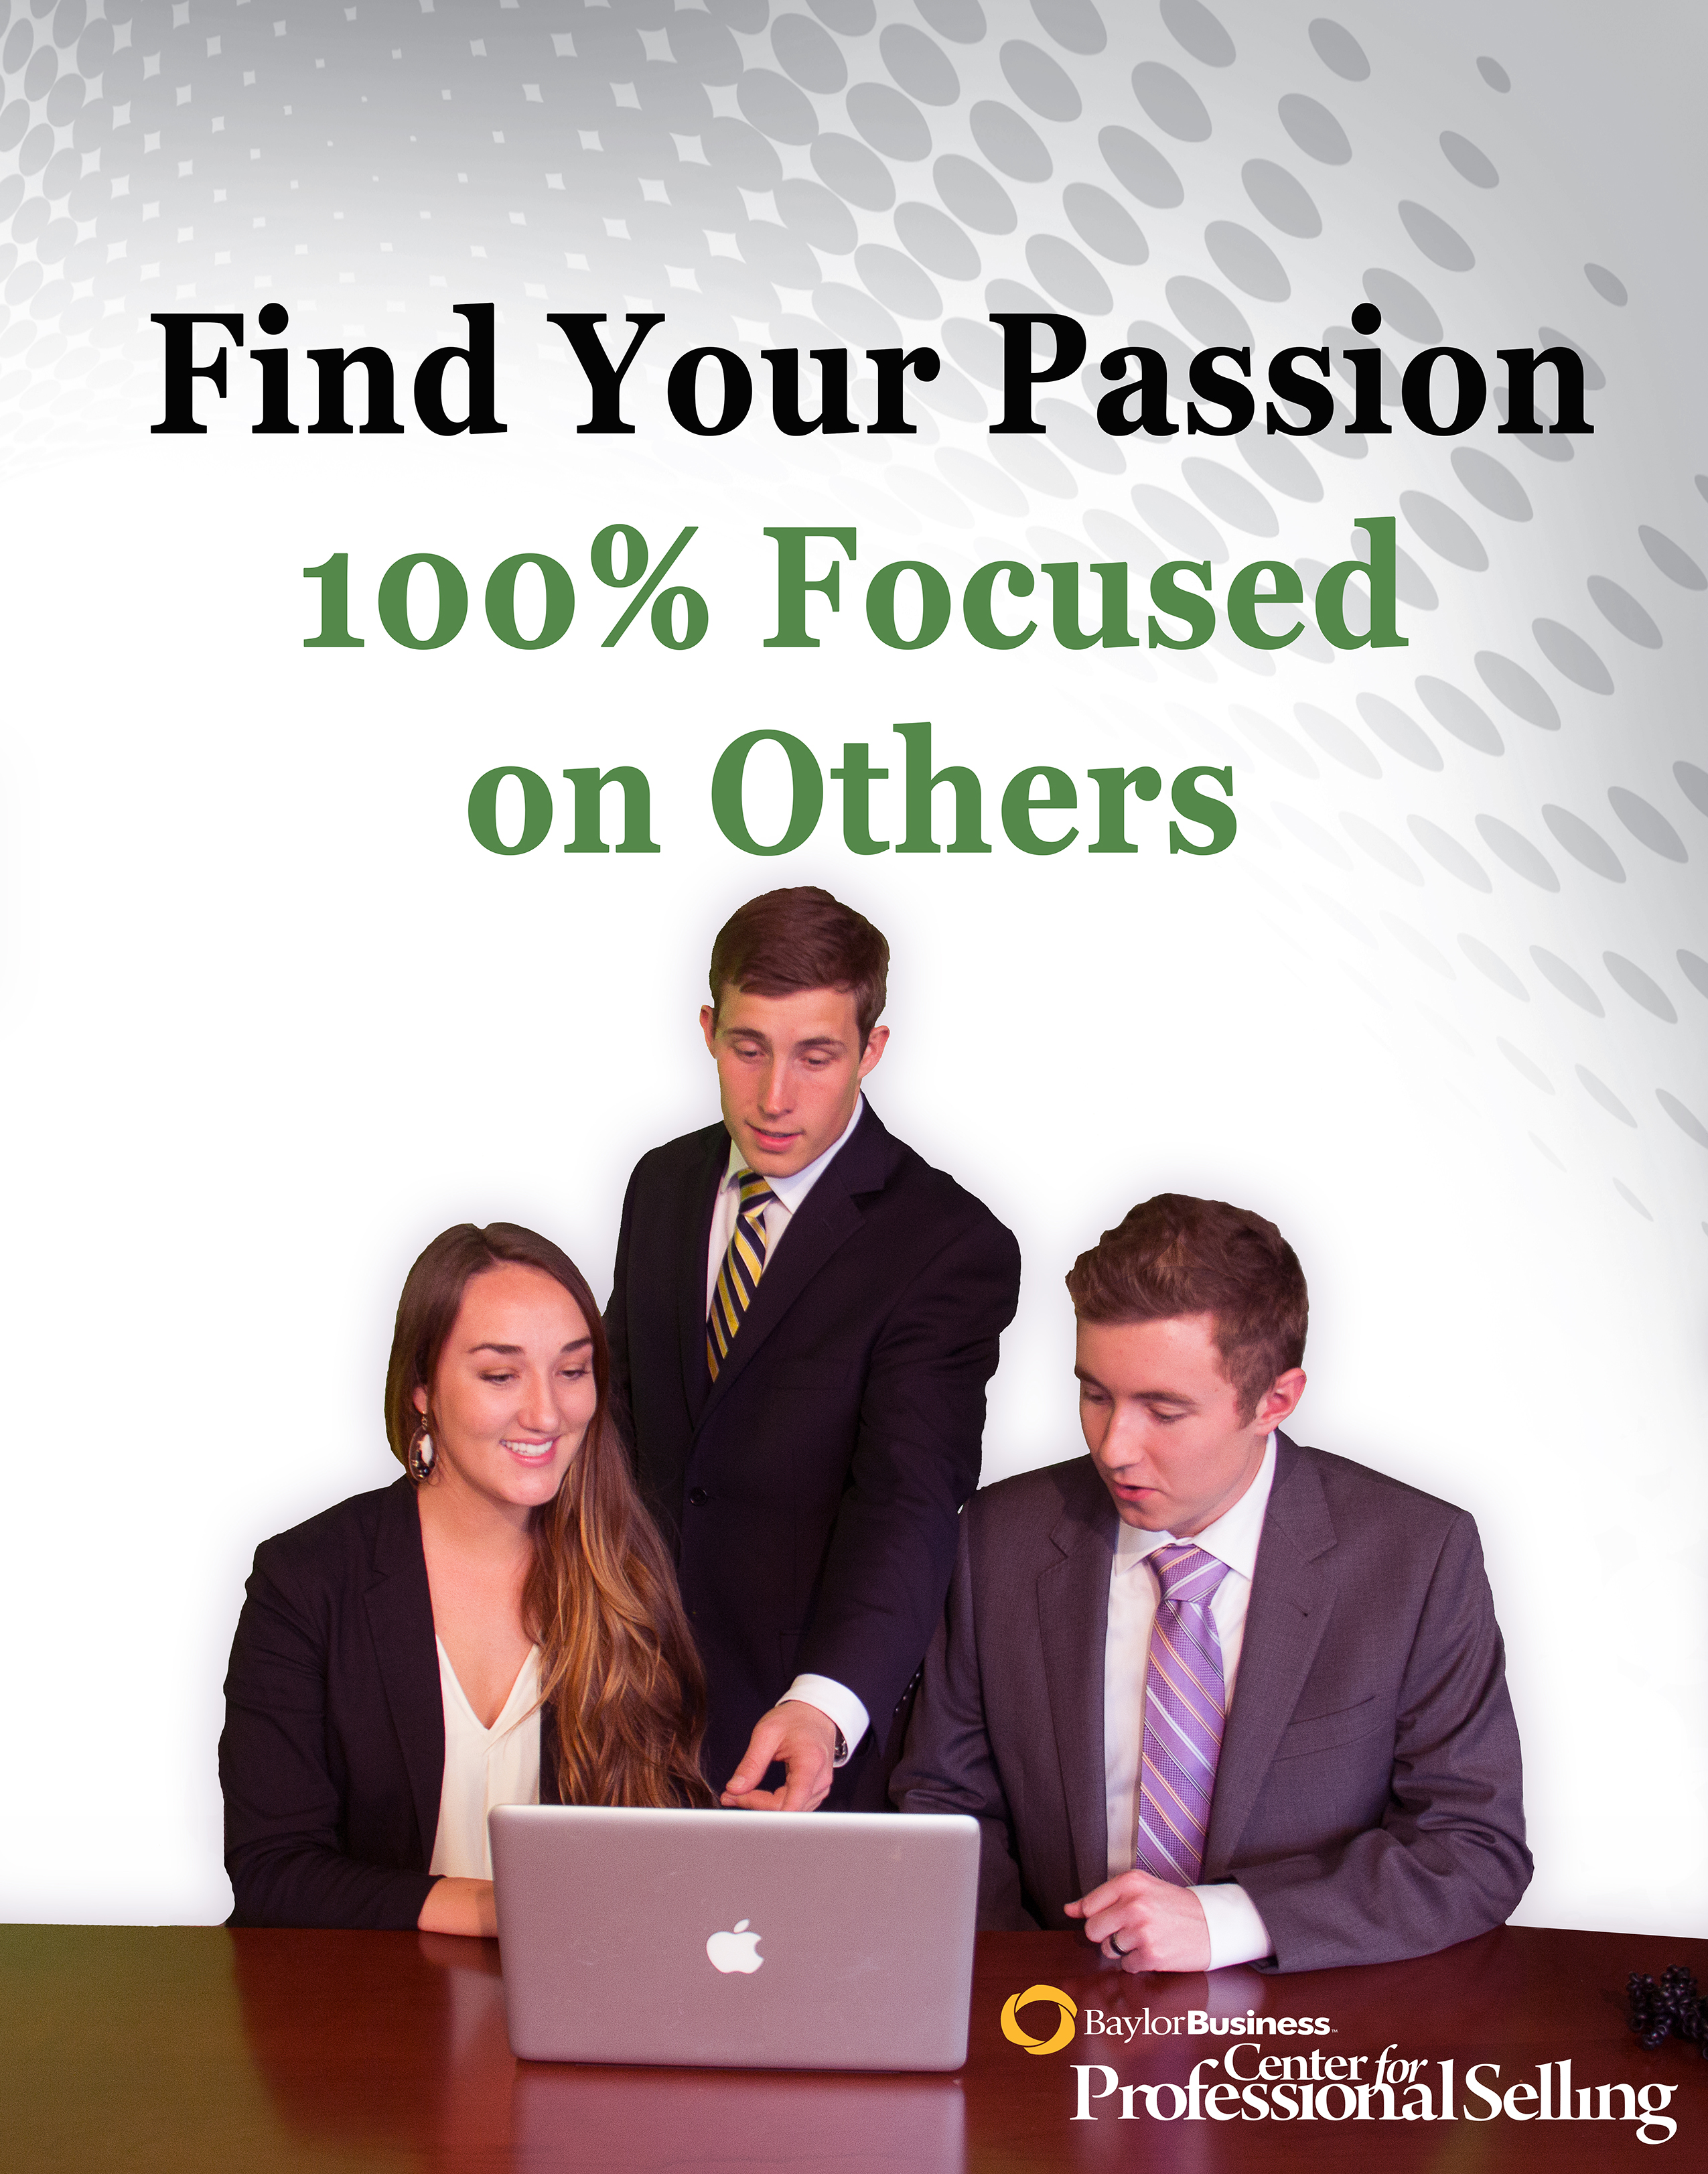 Find Your Passion - 100% Focused on Others Ad 2